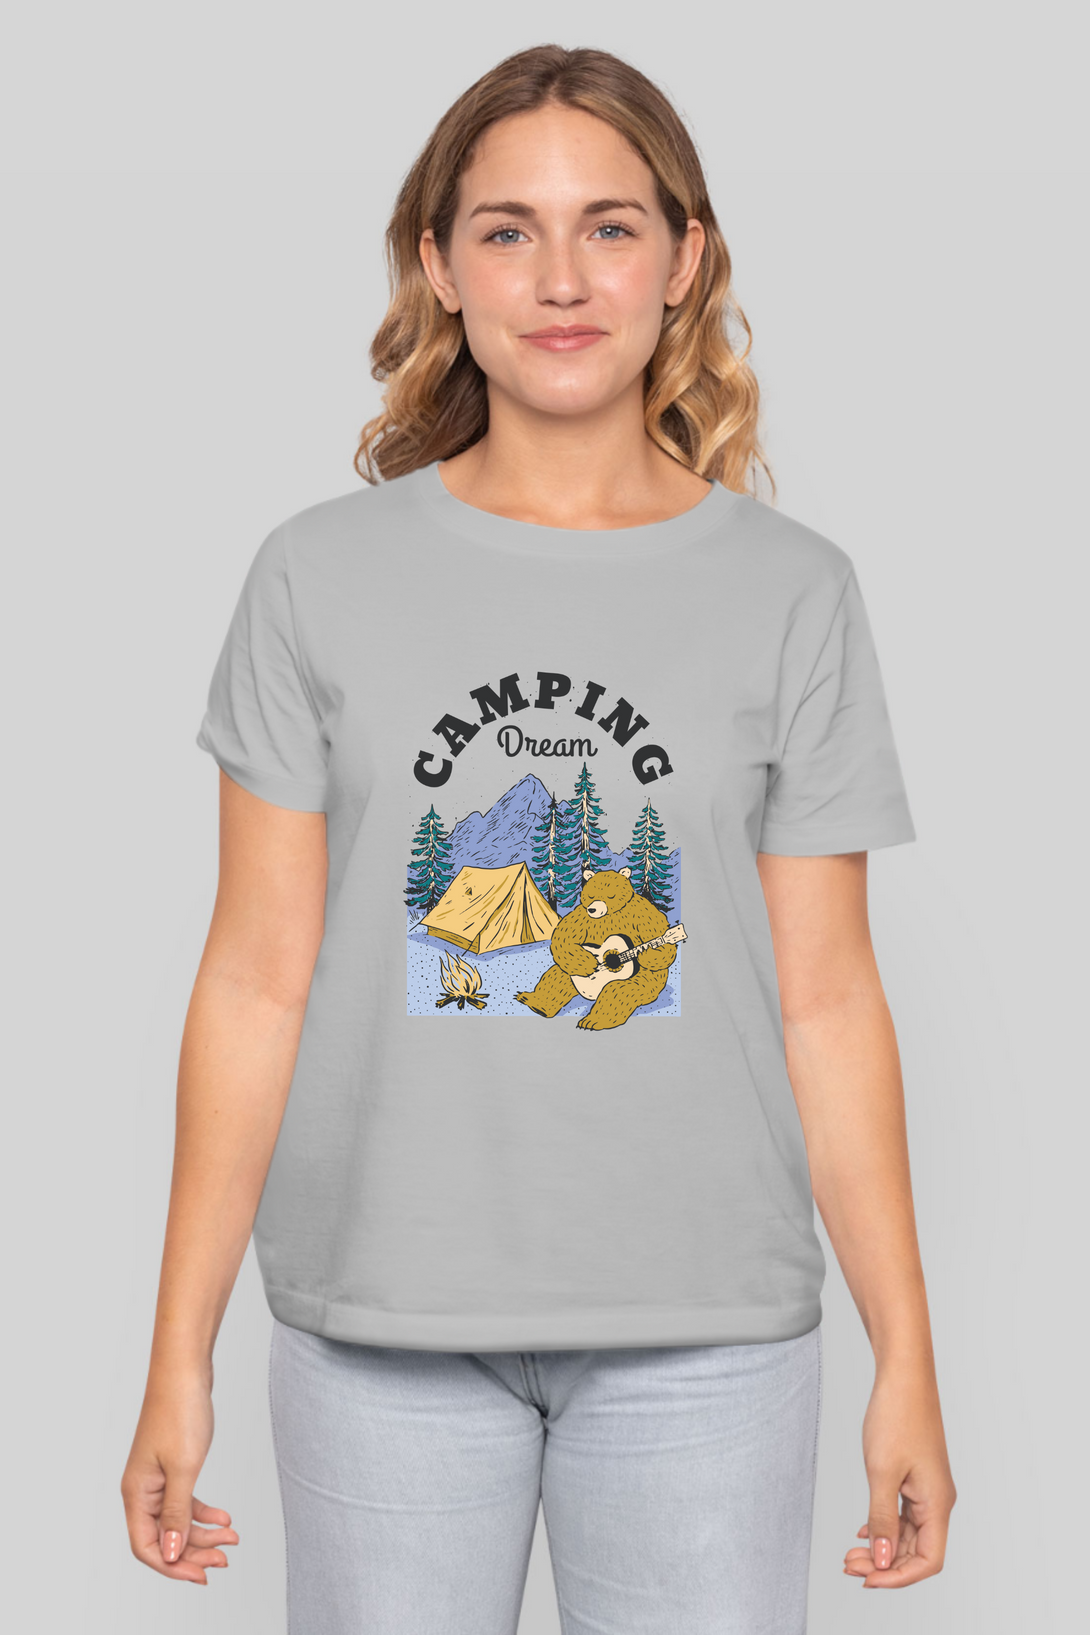 Camping Dream Printed T-Shirt For Women - WowWaves - 10